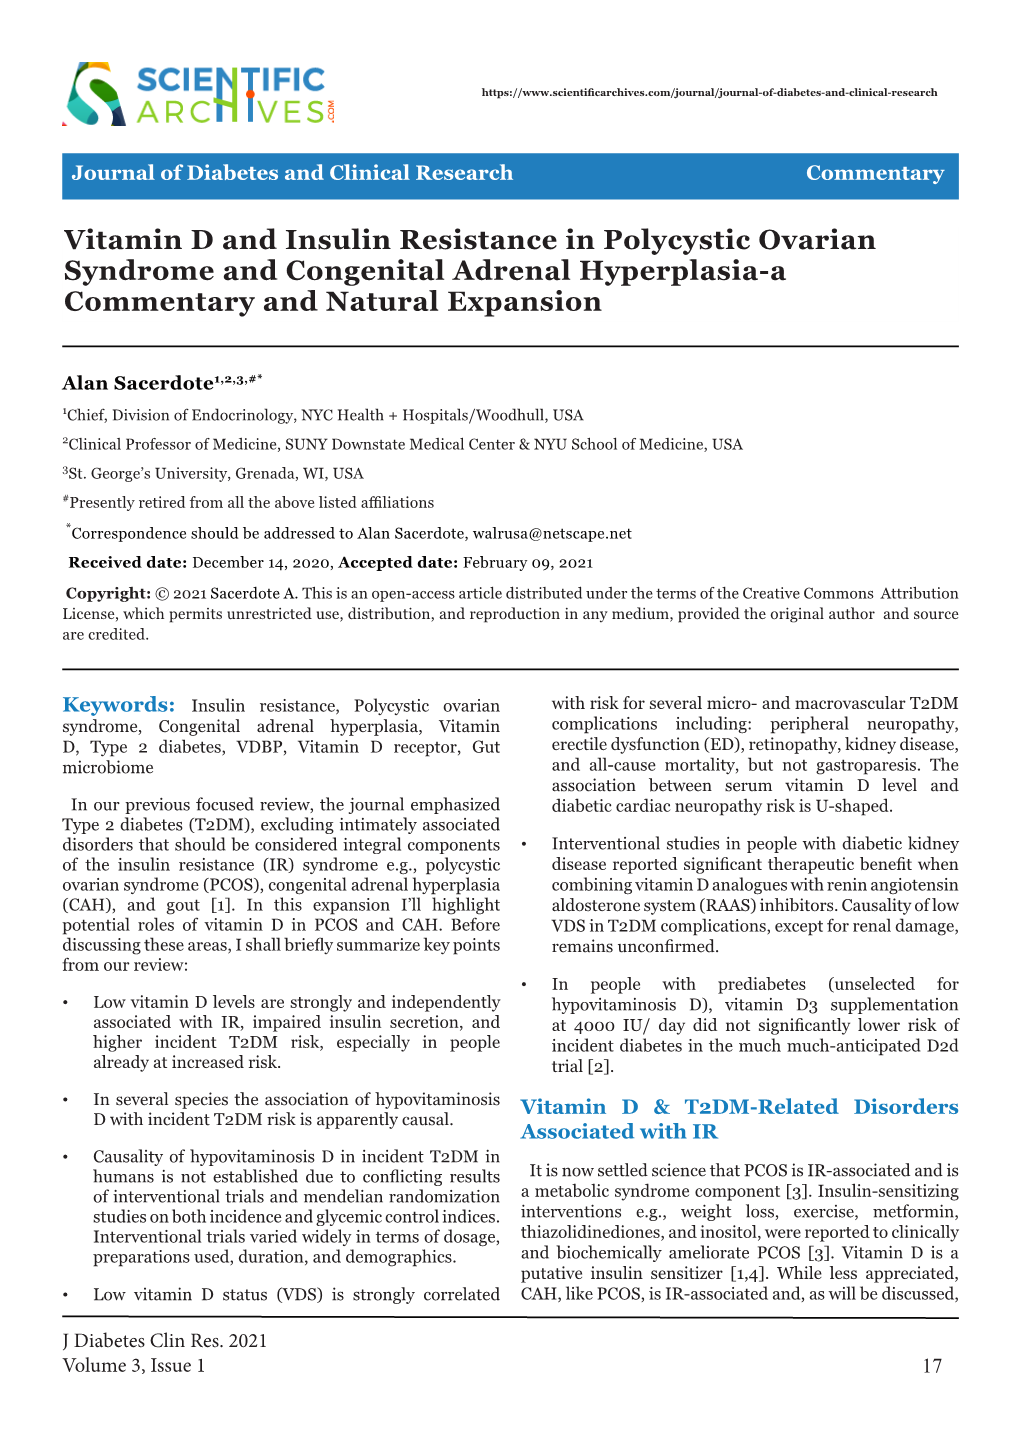 Vitamin D and Insulin Resistance in Polycystic Ovarian Syndrome and Congenital Adrenal Hyperplasia-A Commentary and Natural Expansion